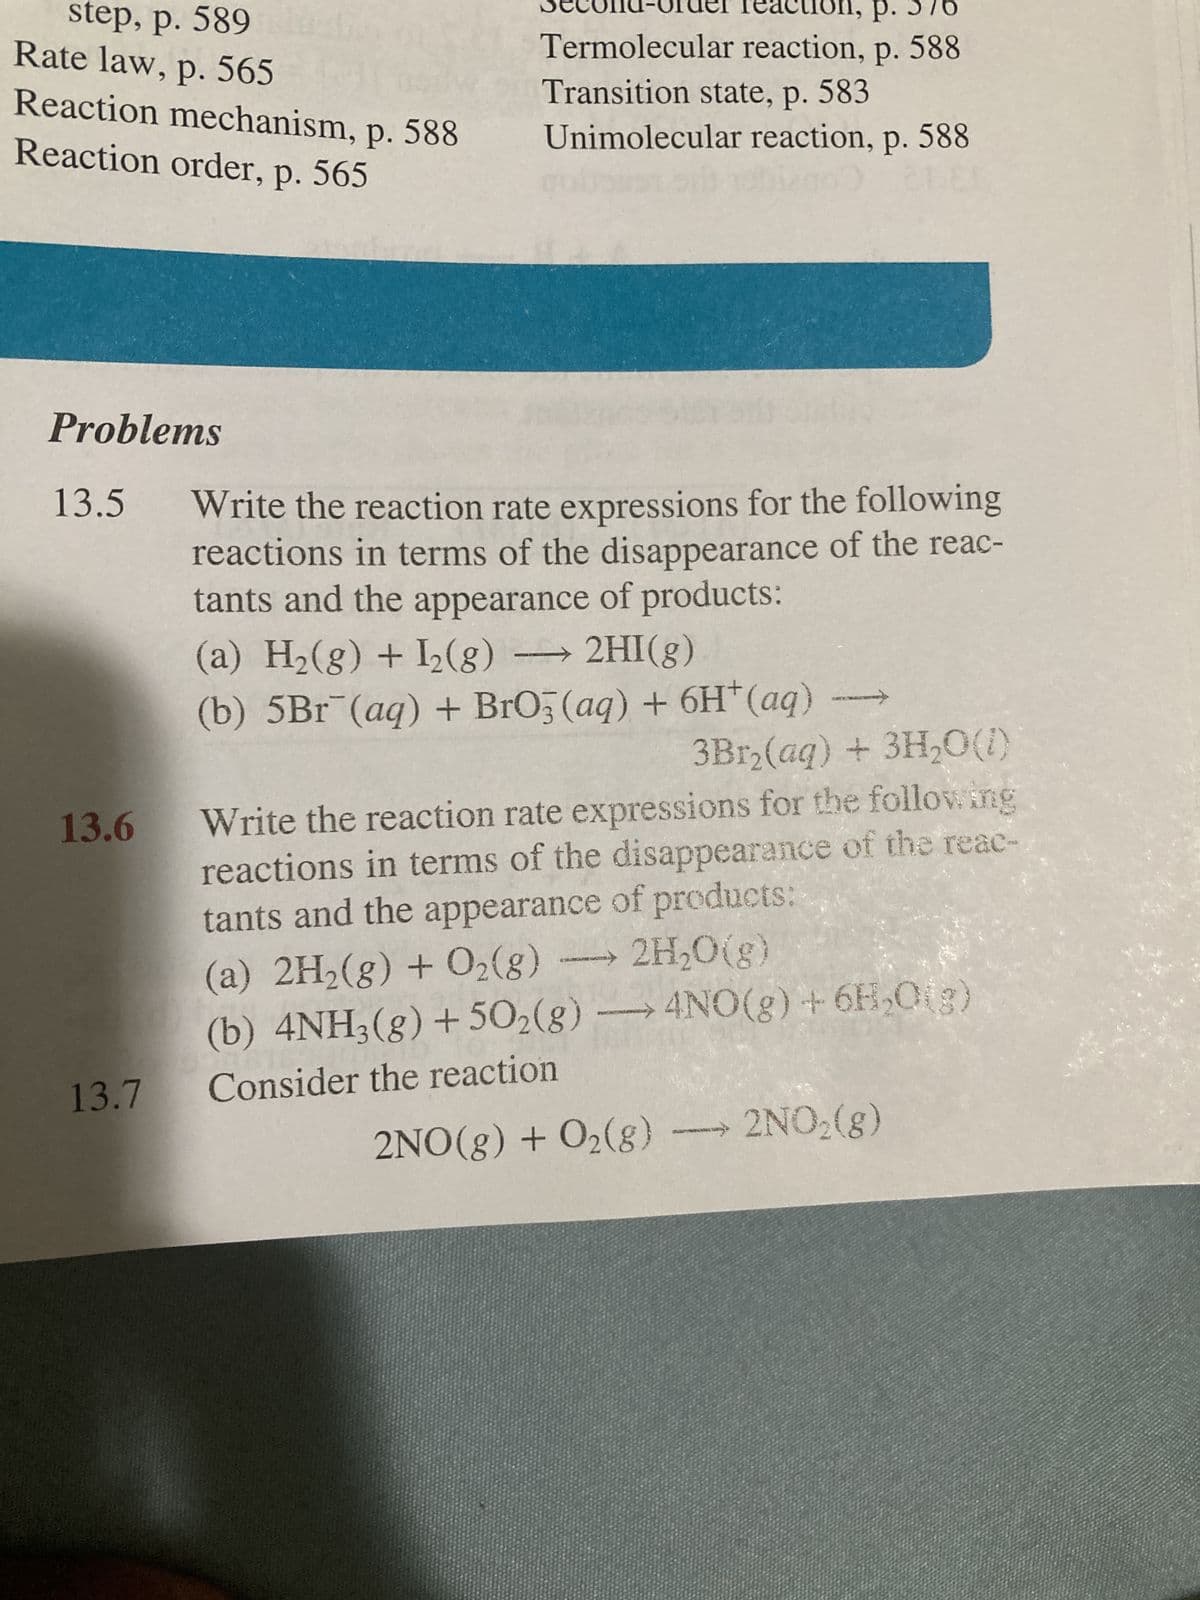 step, p. 589
Rate law, p. 565
Reaction mechanism, p. 588
Reaction order, p. 565
Problems
13.5
13.6
13.7
Termolecular reaction, p. 588
Transition state, p. 583
Unimolecular reaction, p. 588
60
Write the reaction rate expressions for the following
reactions in terms of the disappearance of the reac-
tants and the appearance of products:
(a) H₂(g) + I₂(g) → 2HI(g)
(b) 5Br (aq) + BrO3(aq) + 6H+ (aq)
3Br₂(aq) + 3H₂O(1)
Write the reaction rate expressions for the following
reactions in terms of the disappearance of the reac-
tants and the appearance of products:
(a) 2H₂(g) + O₂(g) → 2H₂O(g)
(b) 4NH3(g) +50₂(g) → 4NO(g) + 6H₂O(g)
Consider the reaction
2NO(g) + O₂(g) →→→ 2NO₂(g)